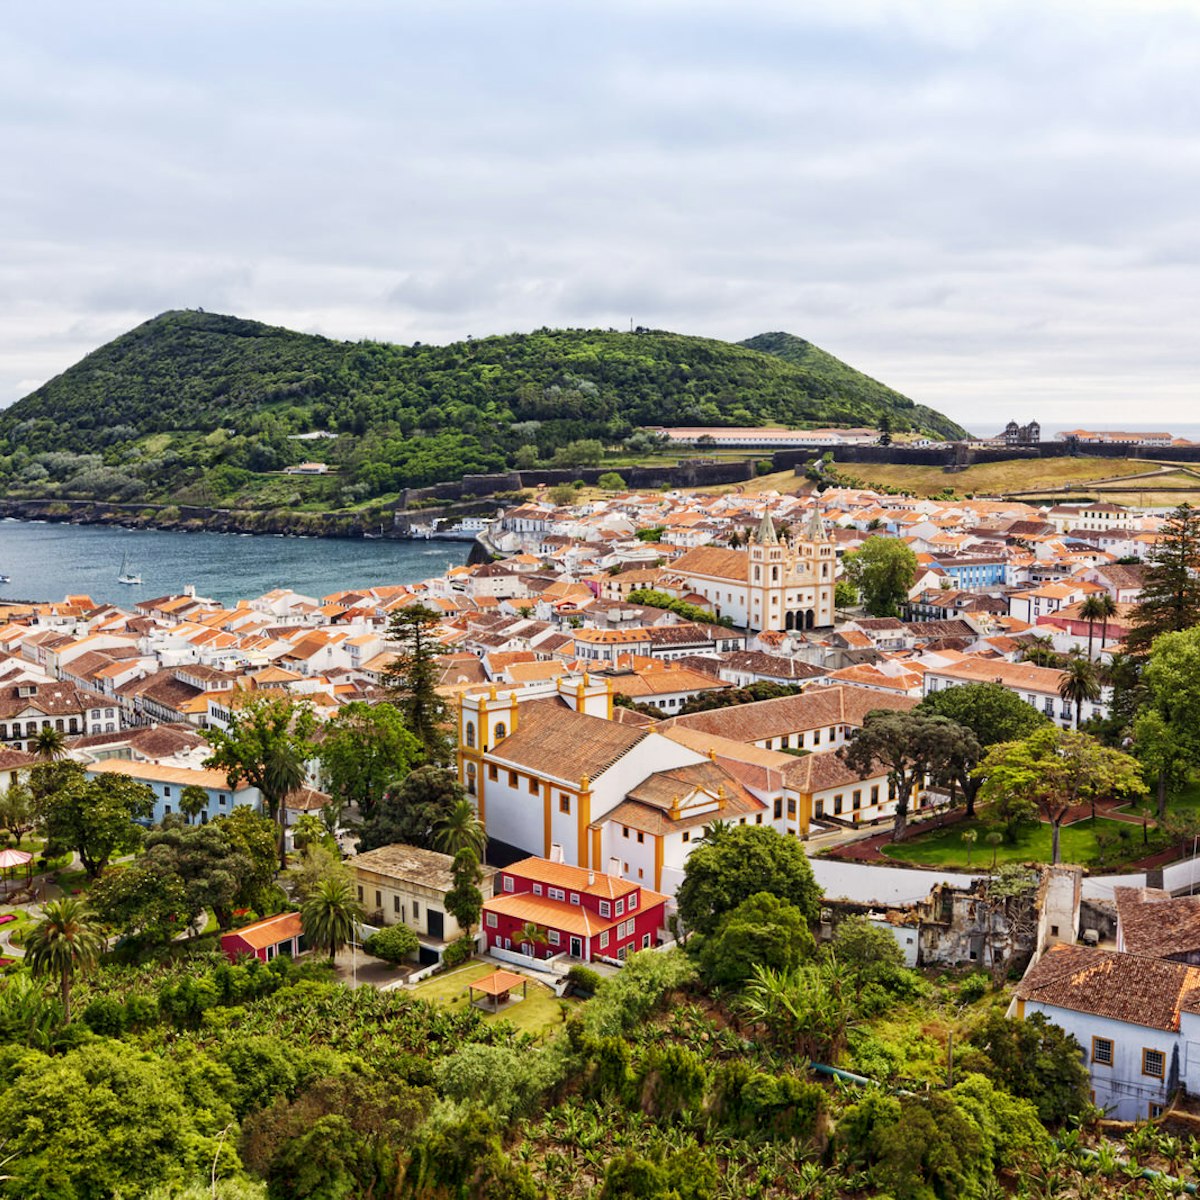 View of the city of Angra do Heroismo with Mount Brazil on Terceira Island; Shutterstock ID 146612801; Your name (First / Last): James Kay; GL account no.: 65050; Netsuite department name: Online Editorial; Full Product or Project name including edition: Azores destination page highlights